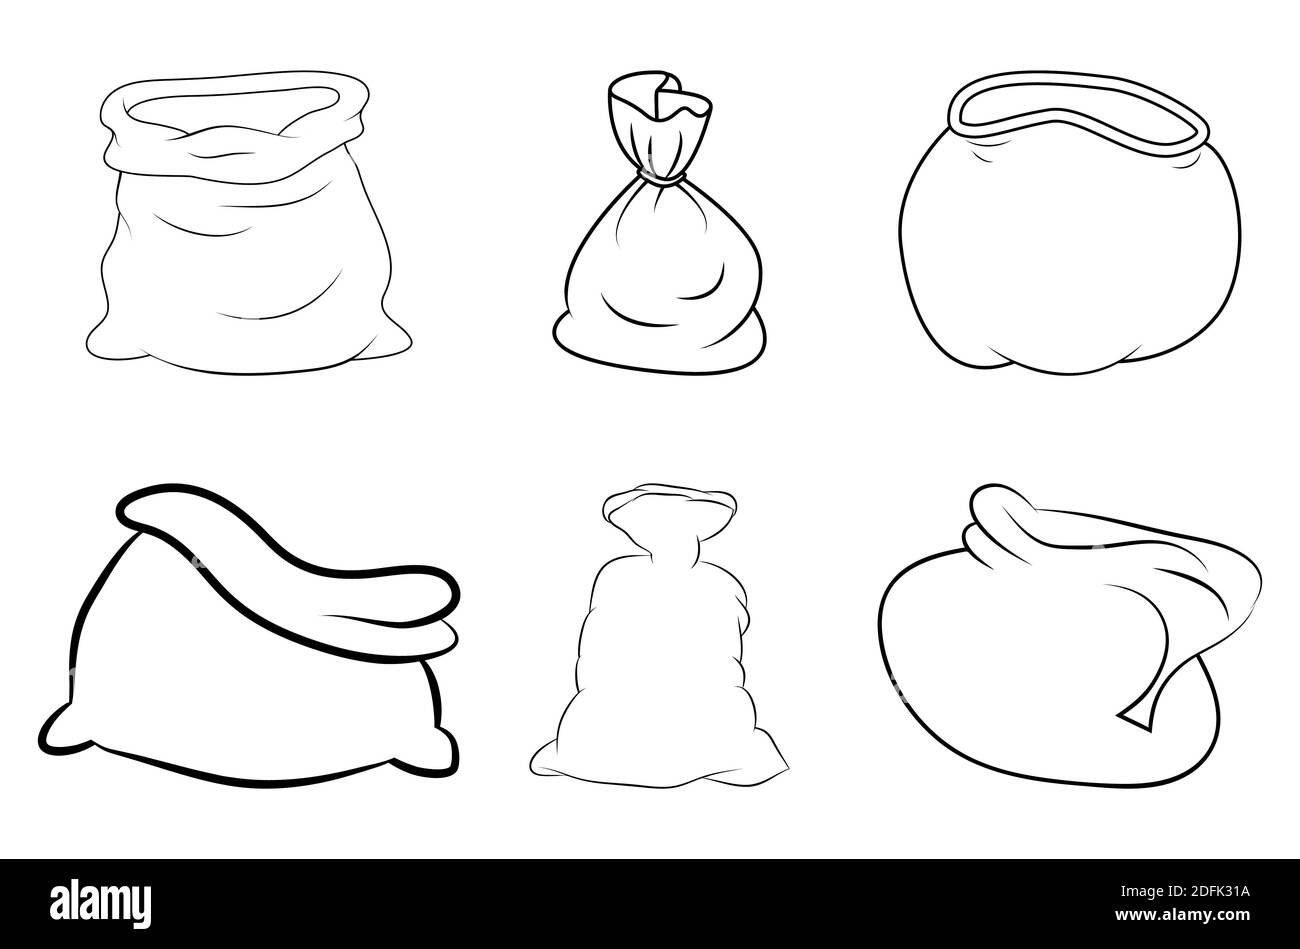 Santa sack outline set. Contour shape of santa claus bag. Vector icon, symbol, design. Empty and full. Open and closed.  Line art xmas drawing collect Stock Vector